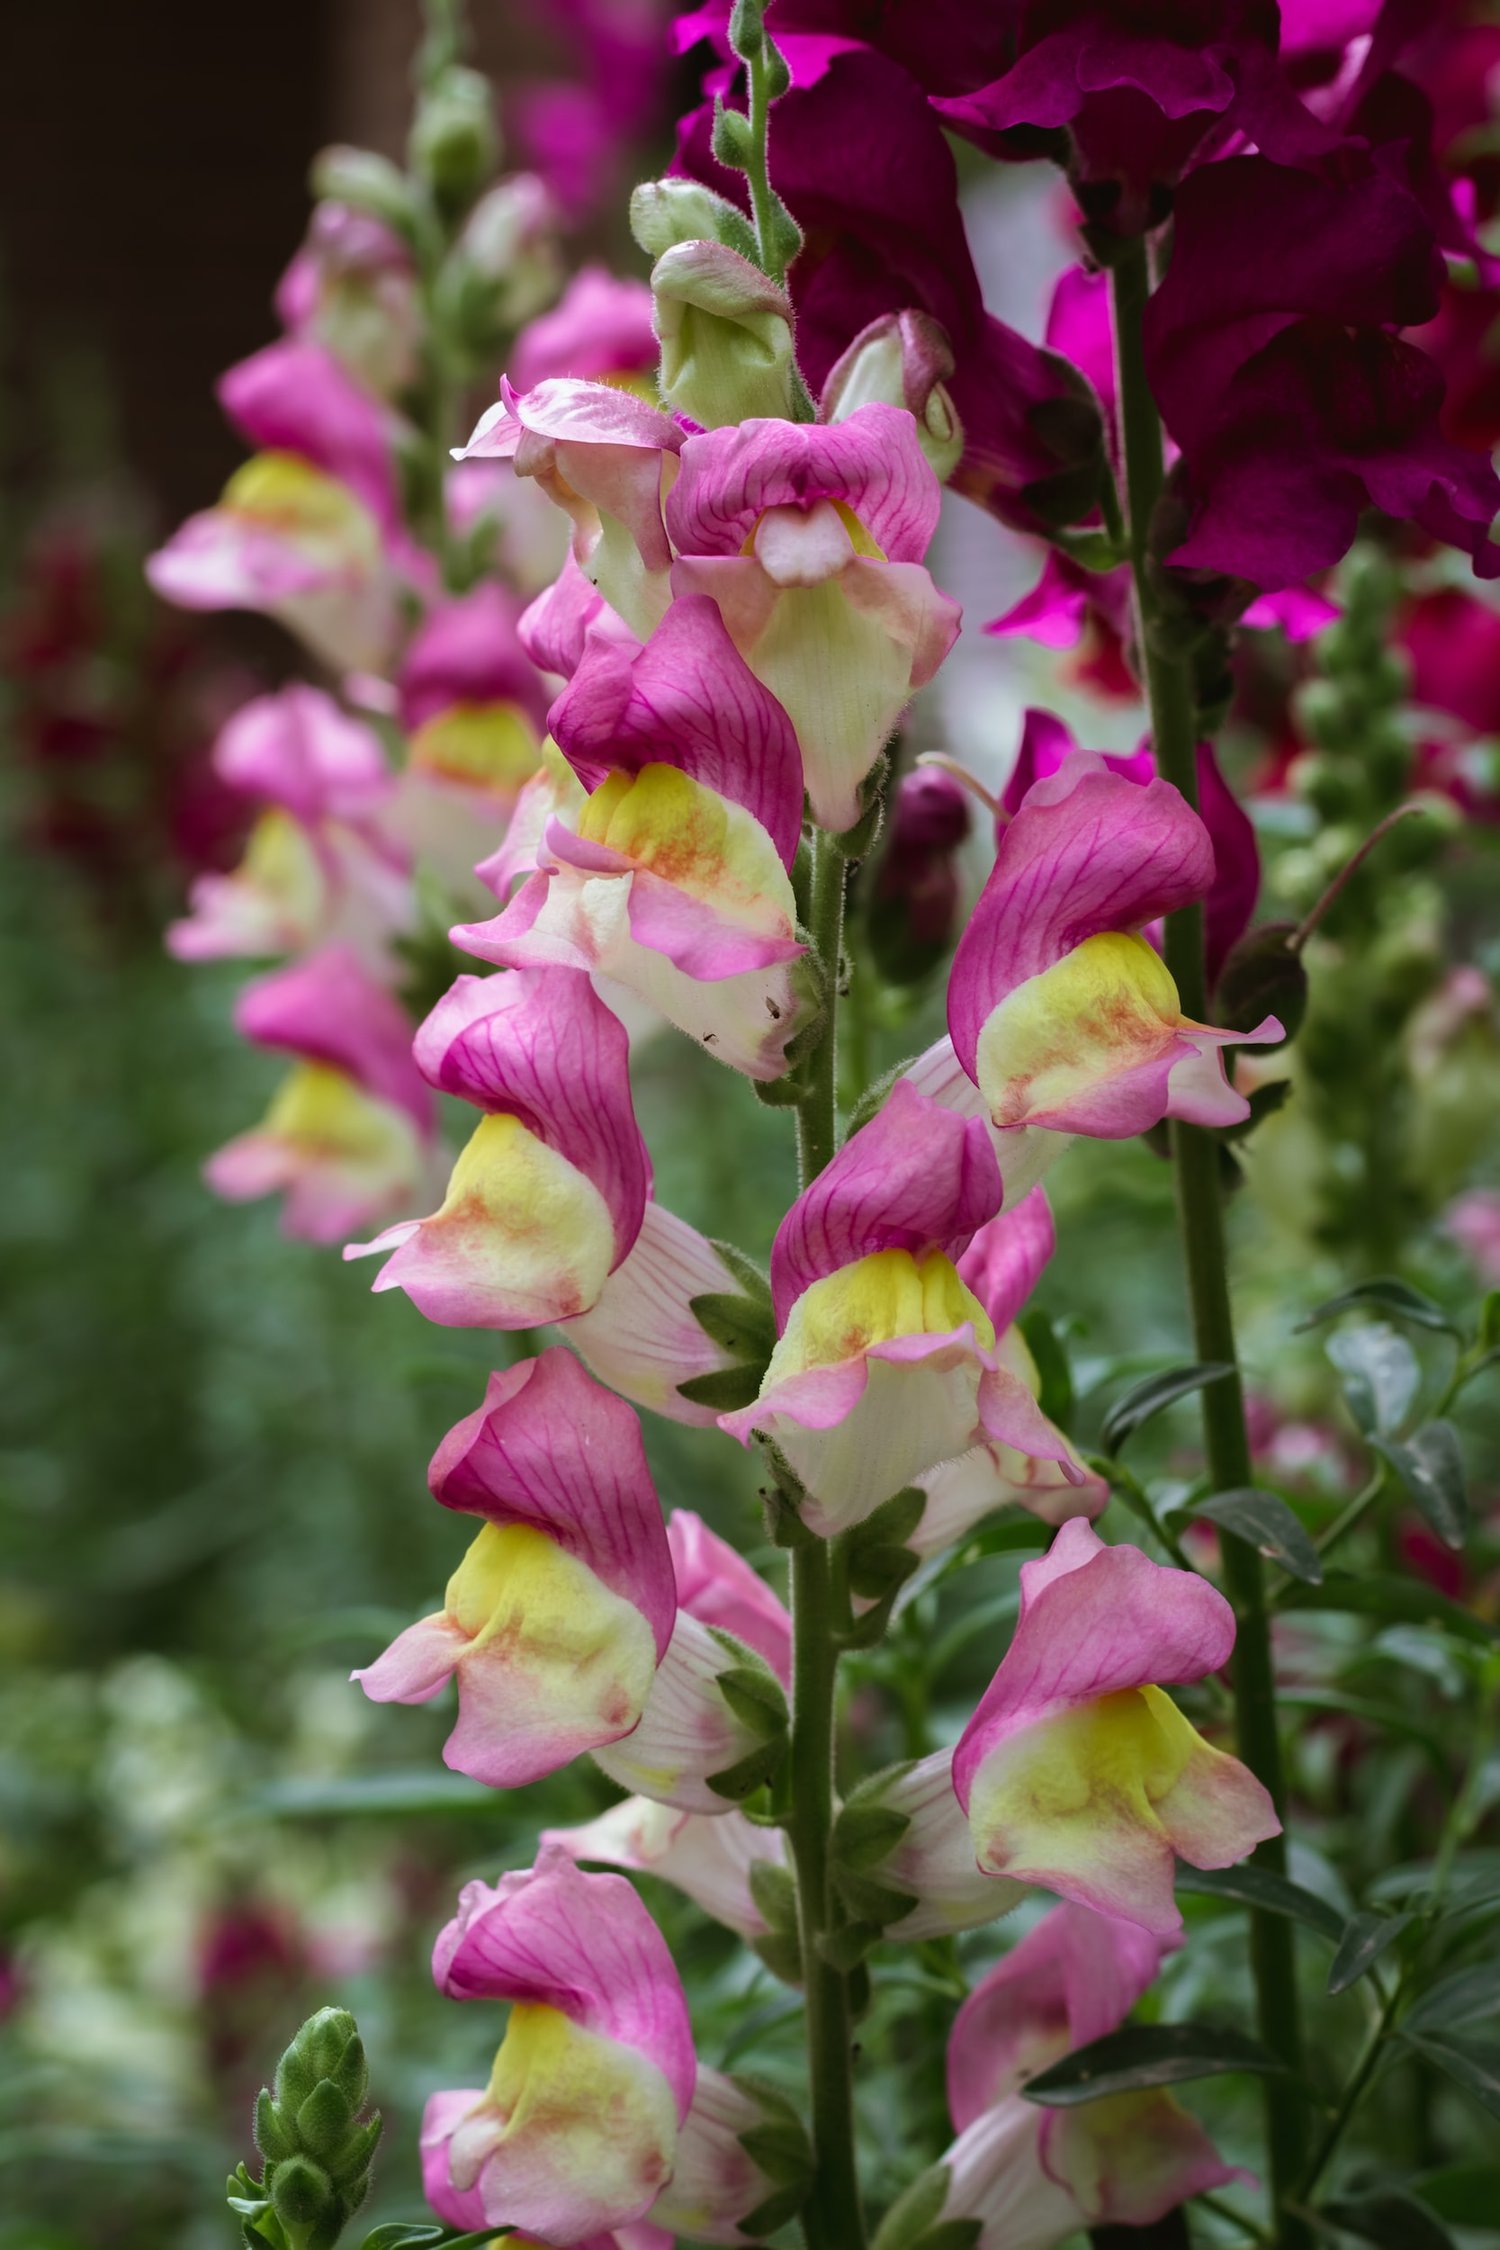 How to prune snapdragons